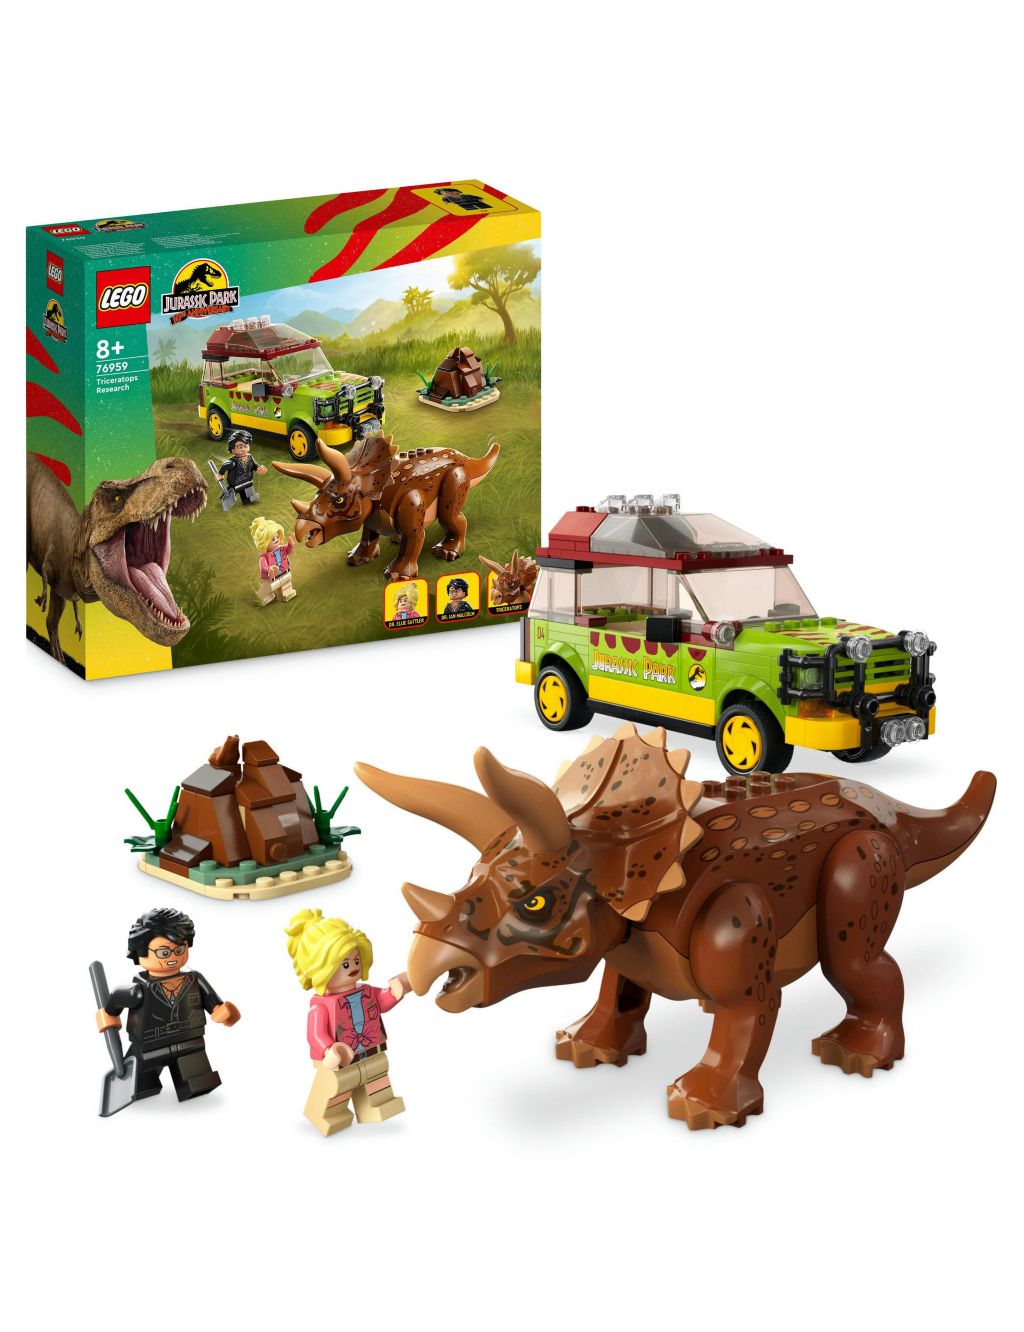 LEGO Jurassic Park Triceratops Research Set (8+ Yrs) image 1